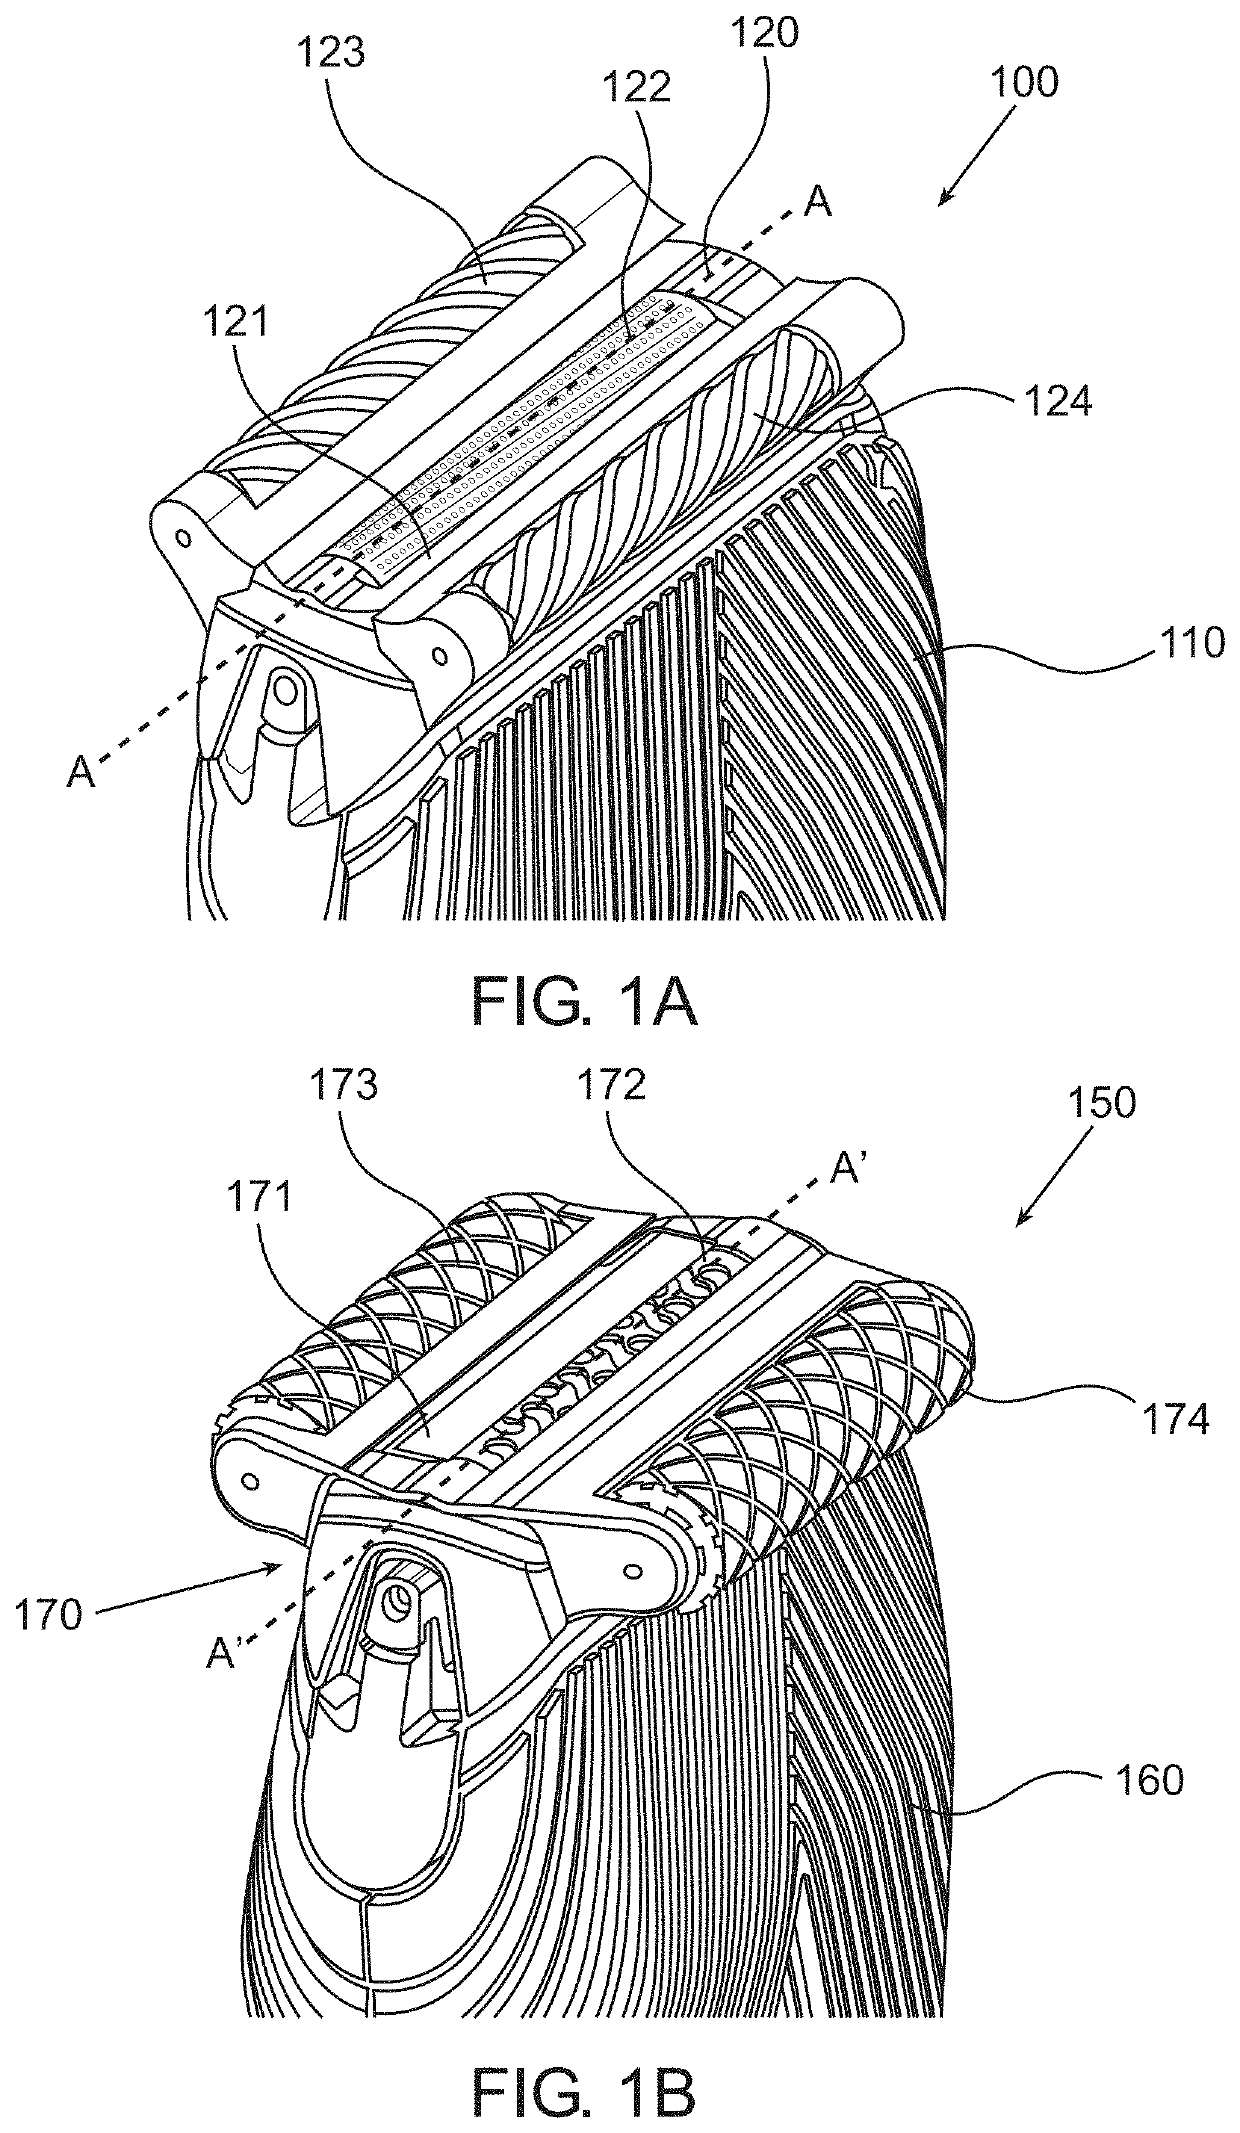 Rotary shaving apparatus without direct forceable contact between the blades and the skin